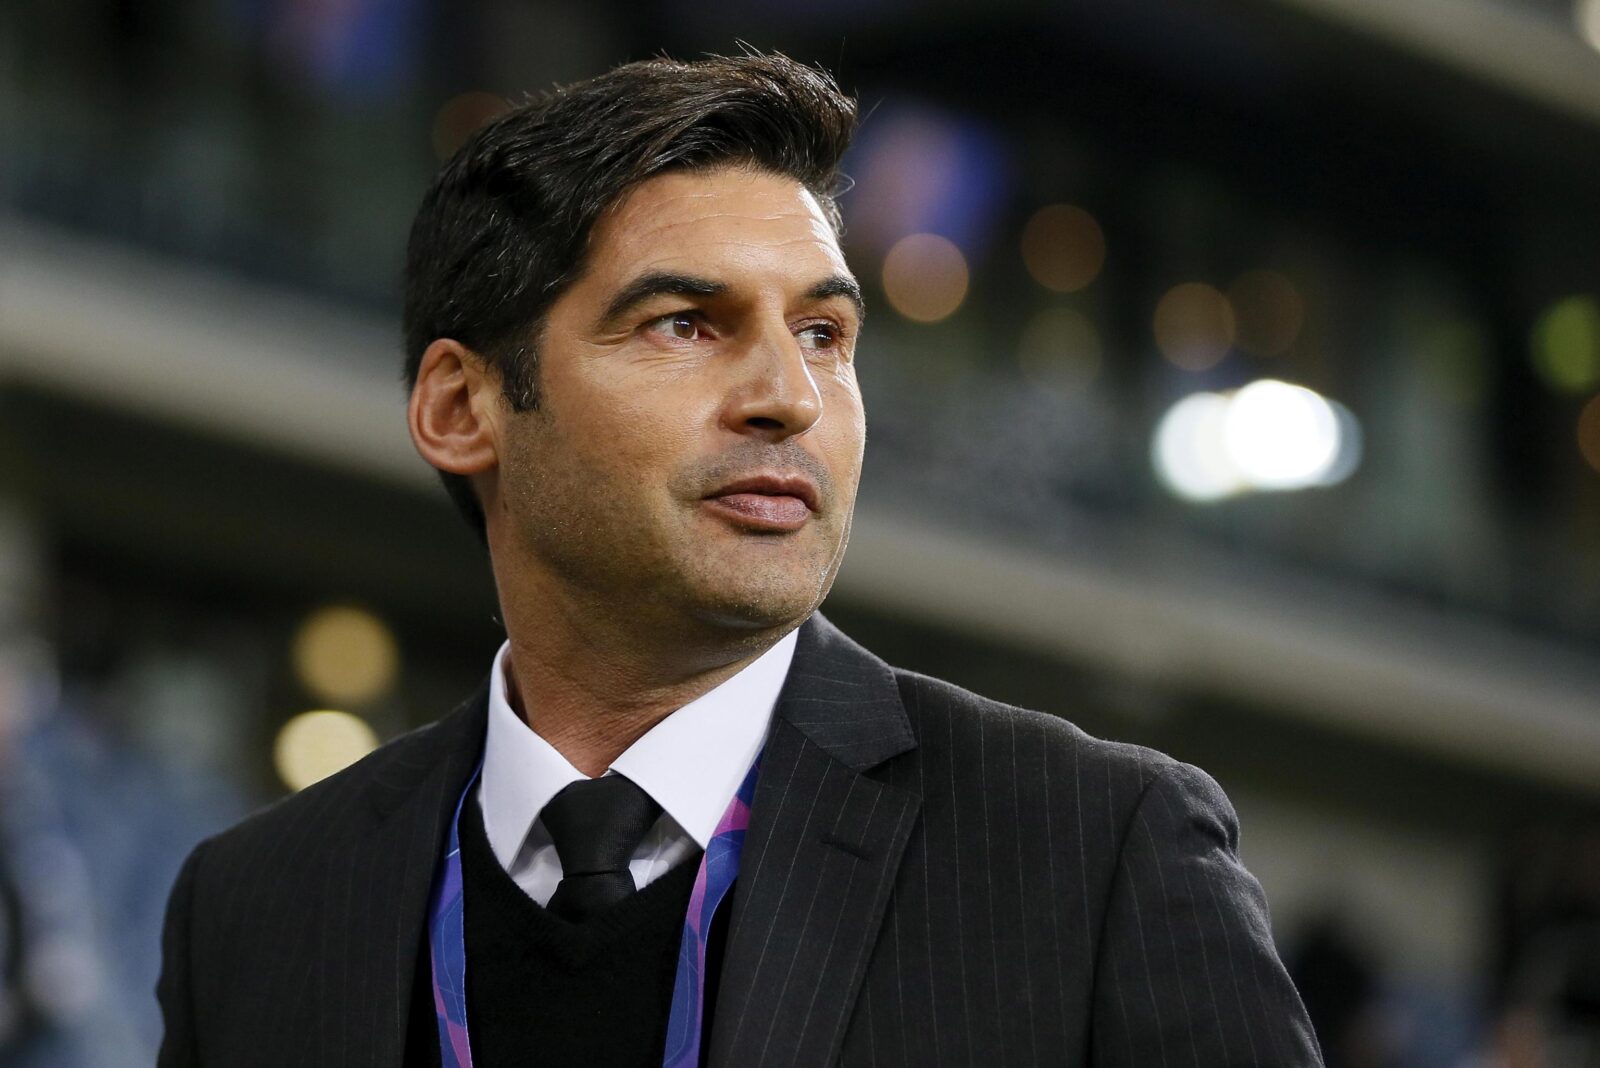 In his first season, Roma manager Paulo Fonseca finished 21 wins, 7 ties and 10 losses.